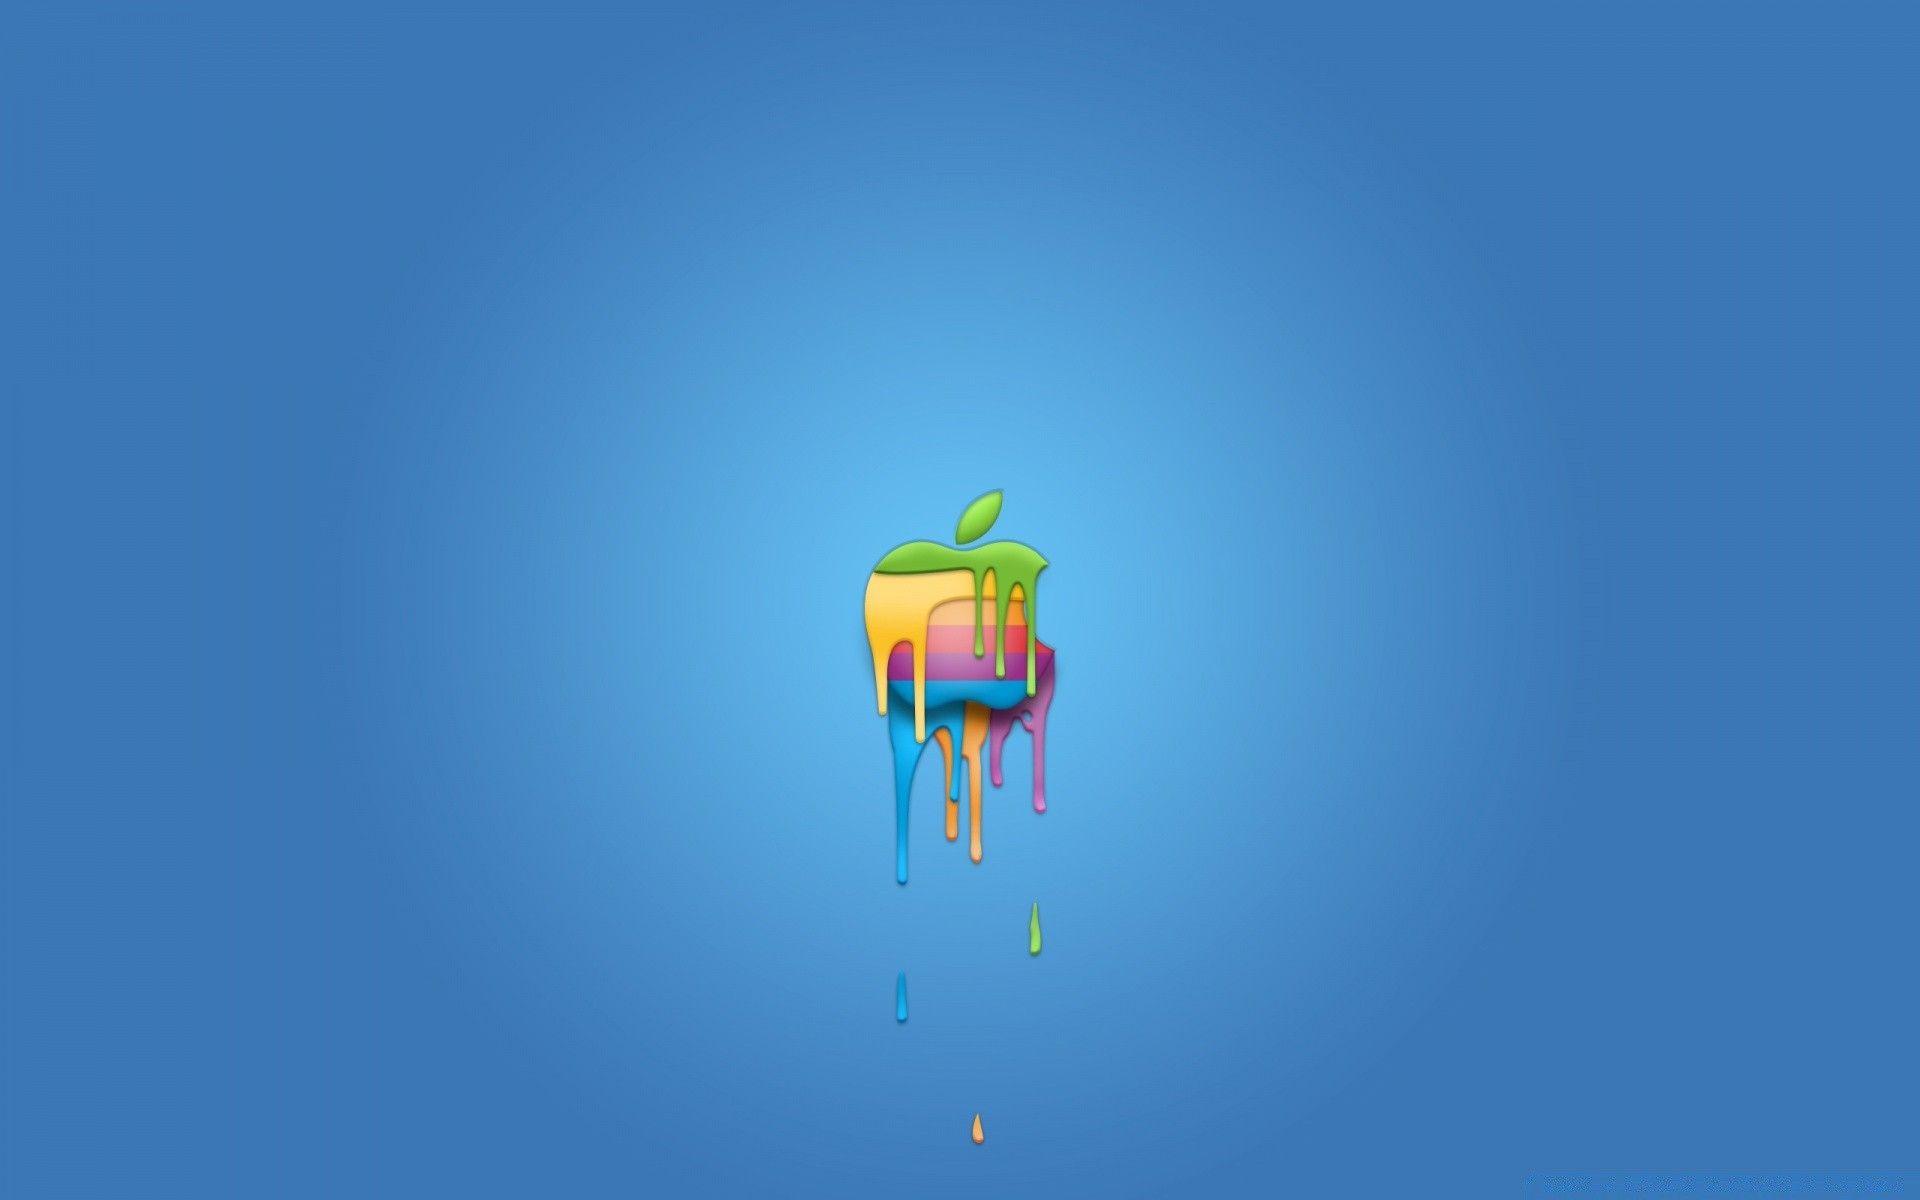 Apple Logo Paint. Android wallpaper for free